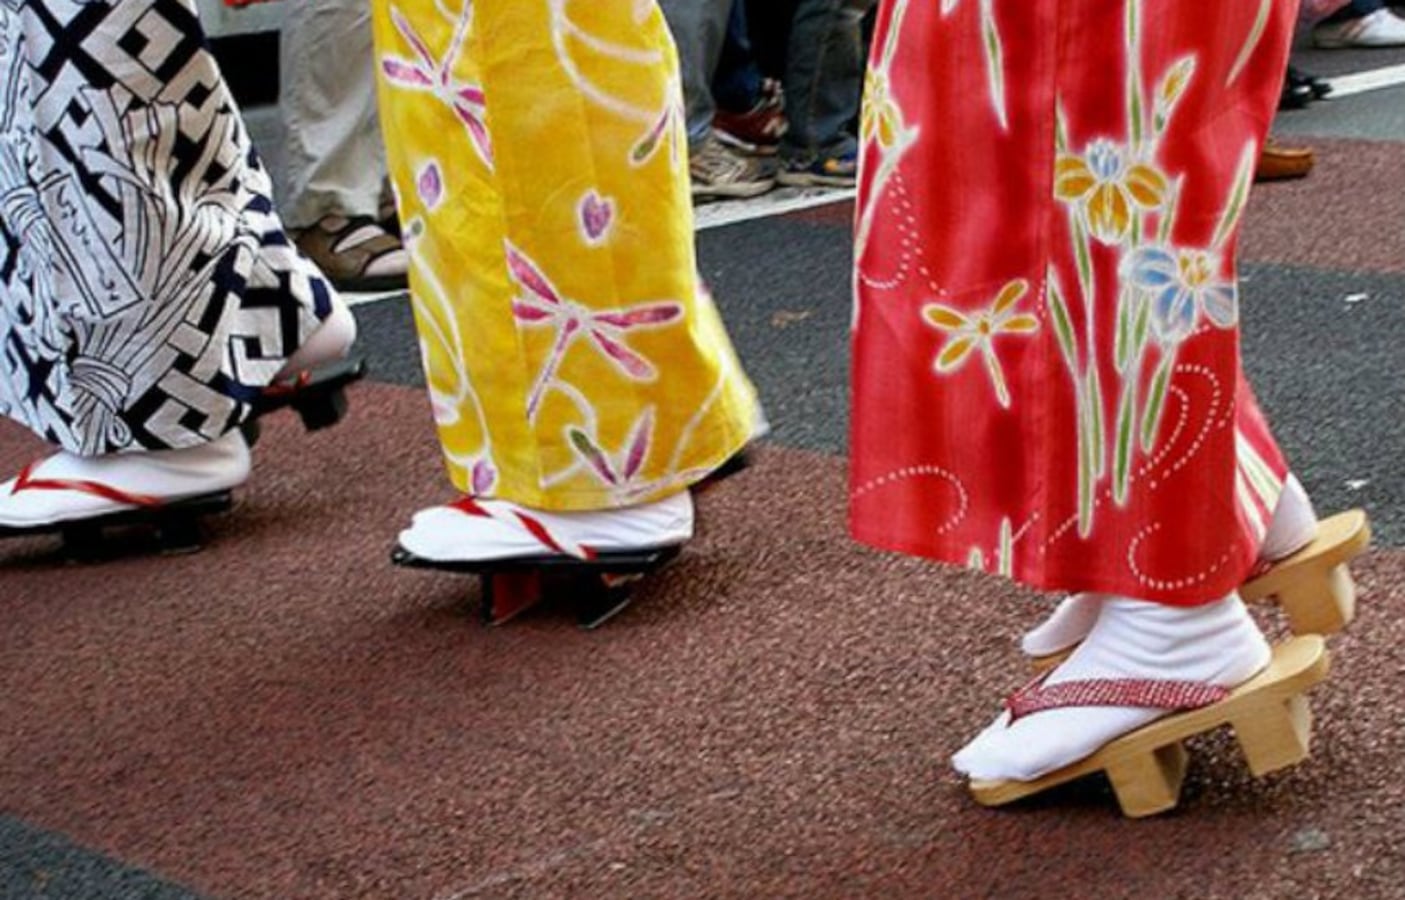 How to Properly Wear 'Geta' | All About Japan